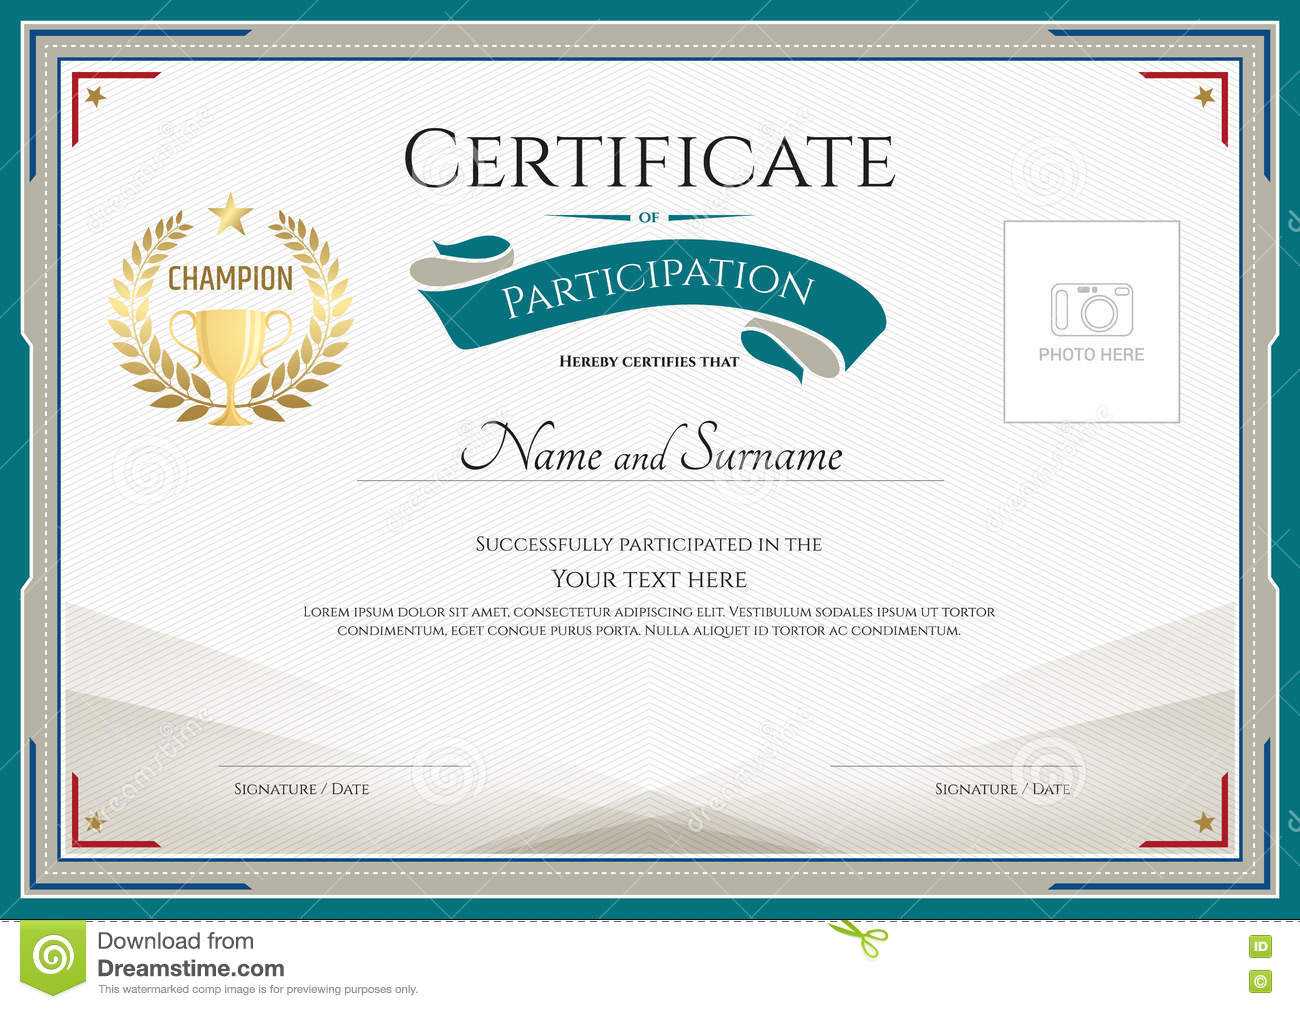 Certificate Of Participation Template With Green Broder Regarding Certificate Of Participation Template Word